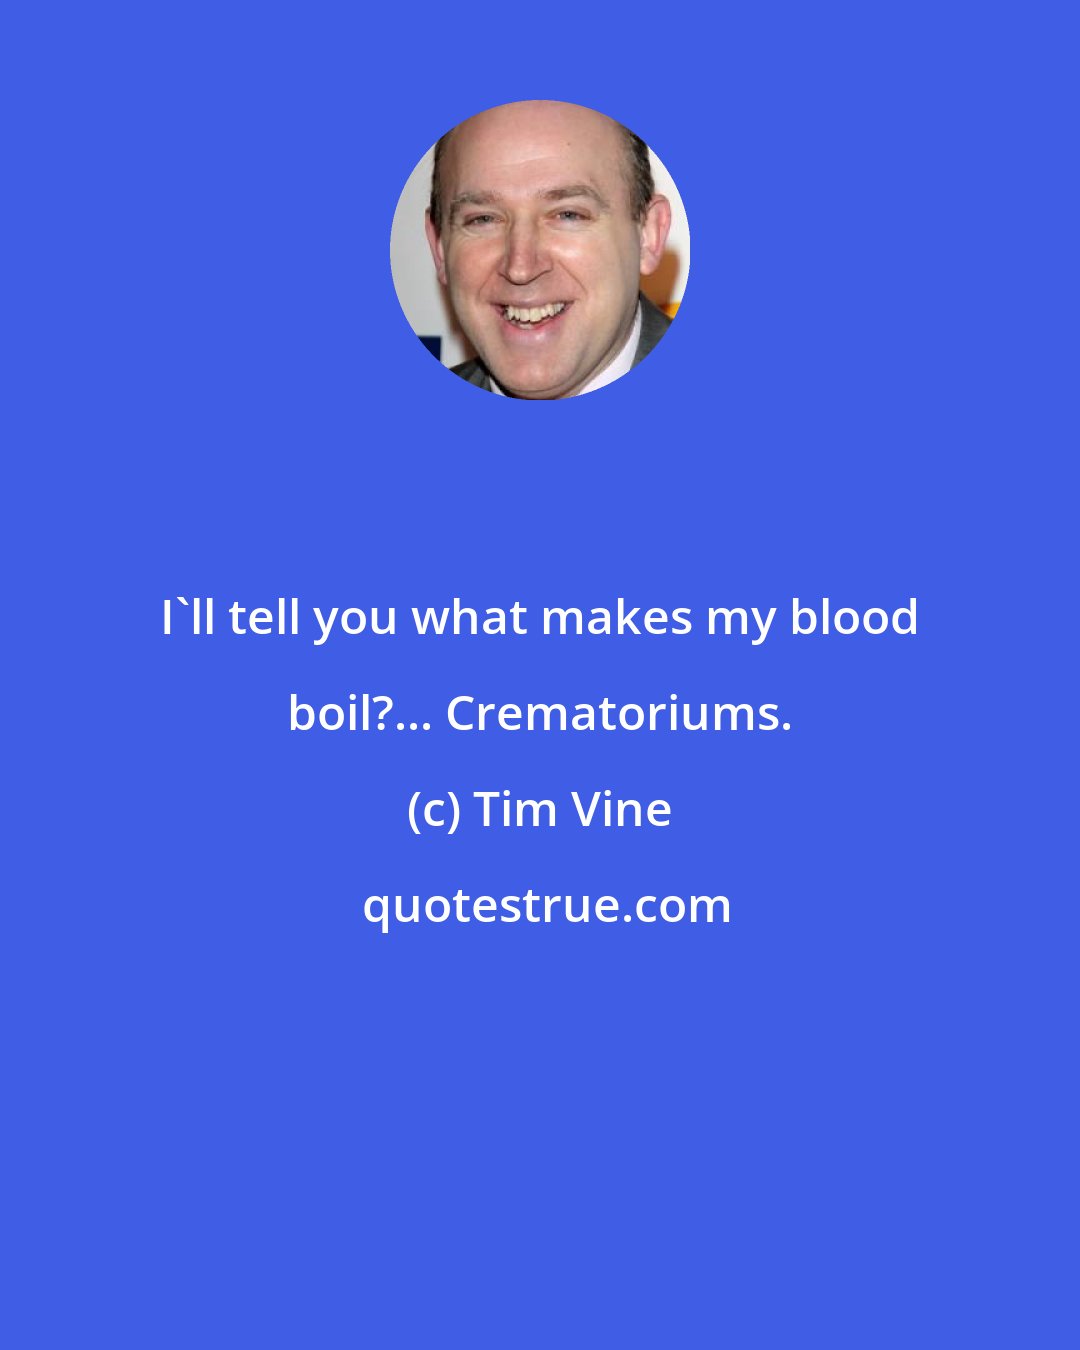 Tim Vine: I'll tell you what makes my blood boil?... Crematoriums.